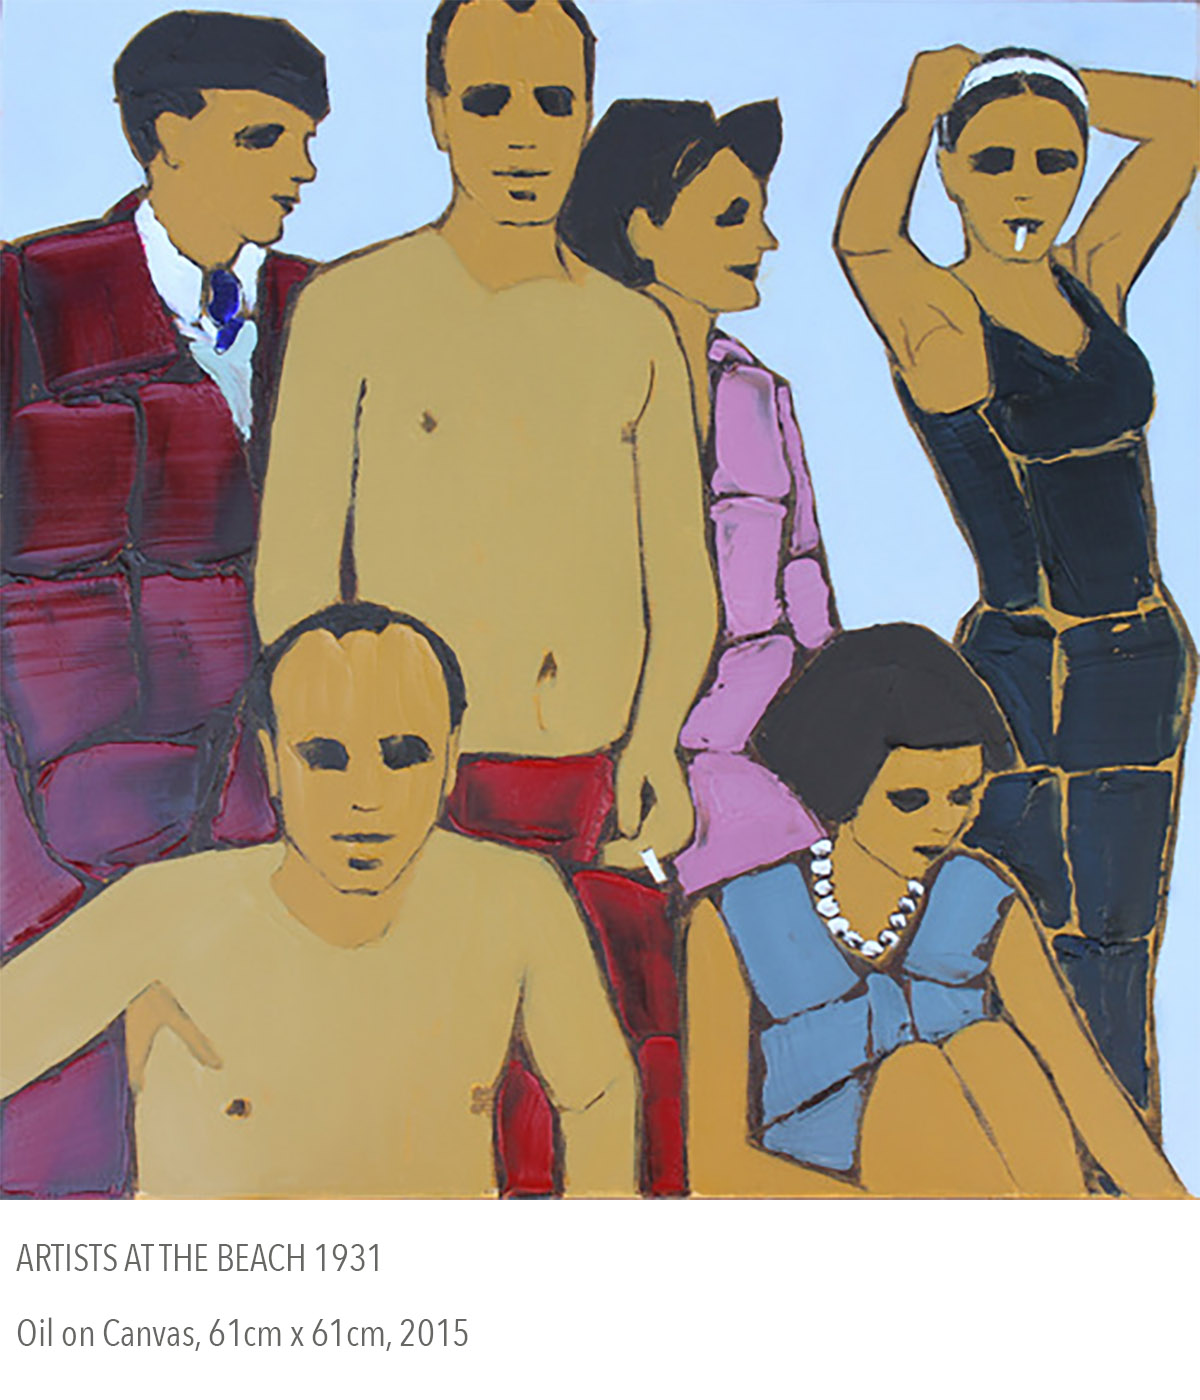 2015 oil painting called Artists at the Beach 1931